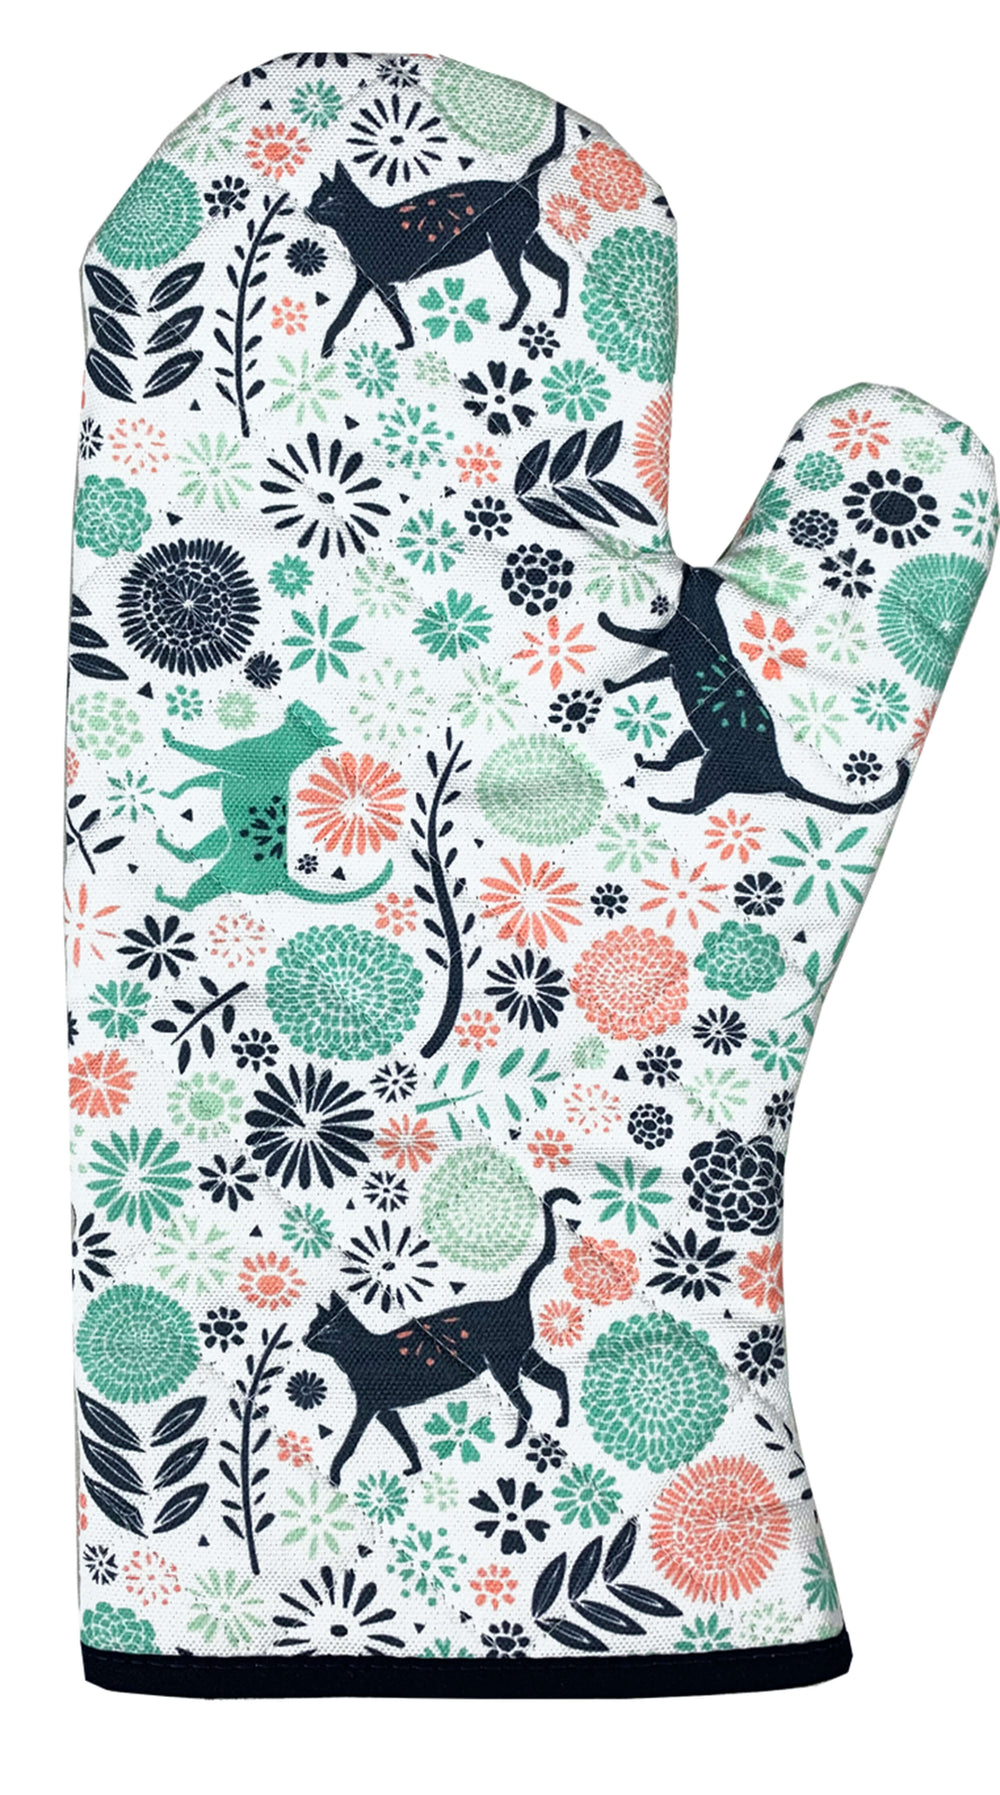 Vicky Yorke Matching Cats Oven Gloves, Gauntlet and Tea Towel - Gift Set Kitchen